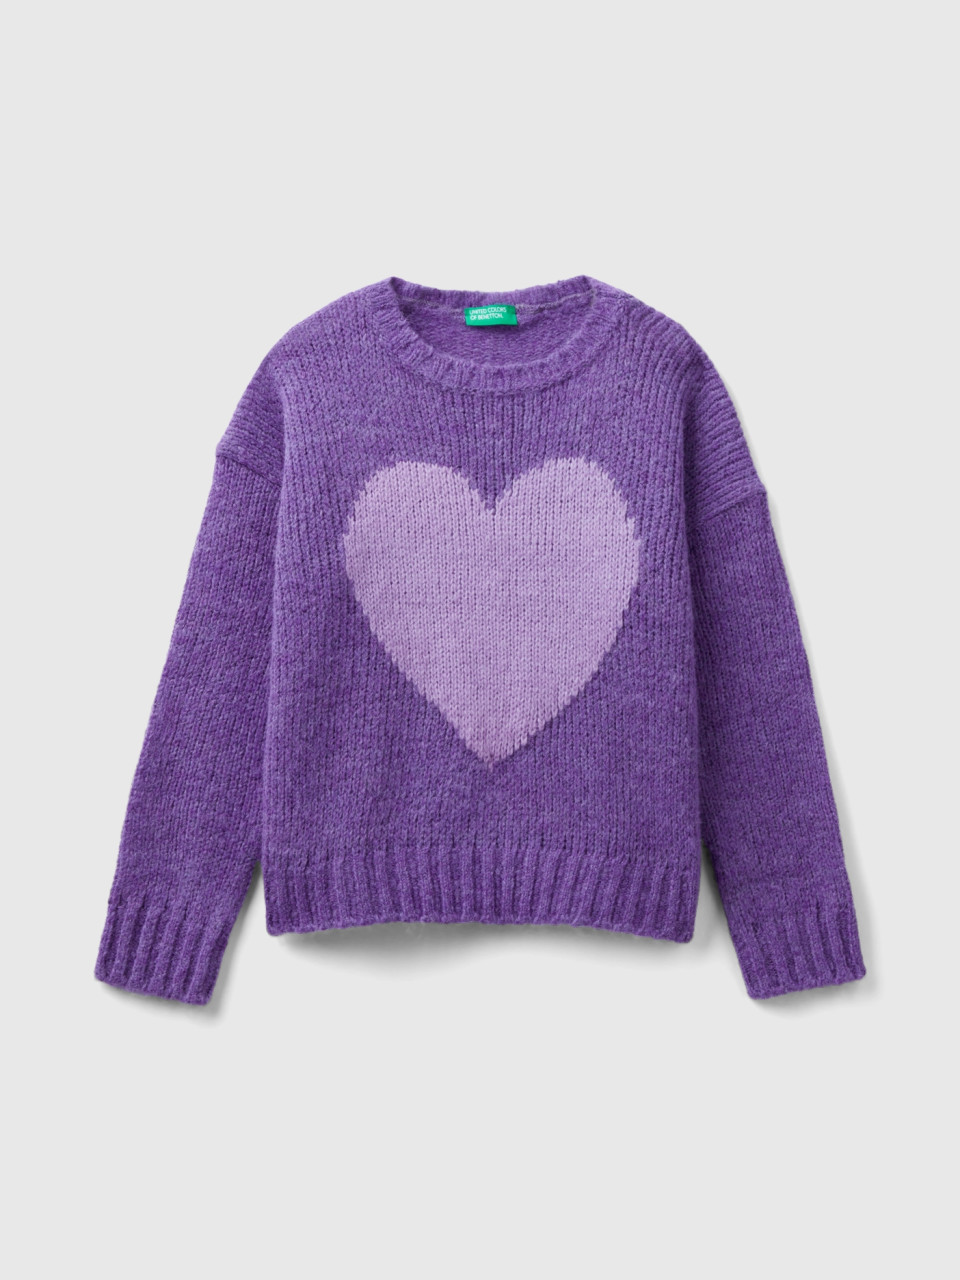 Benetton, Sweater With Heart Inlay, Violet, Kids